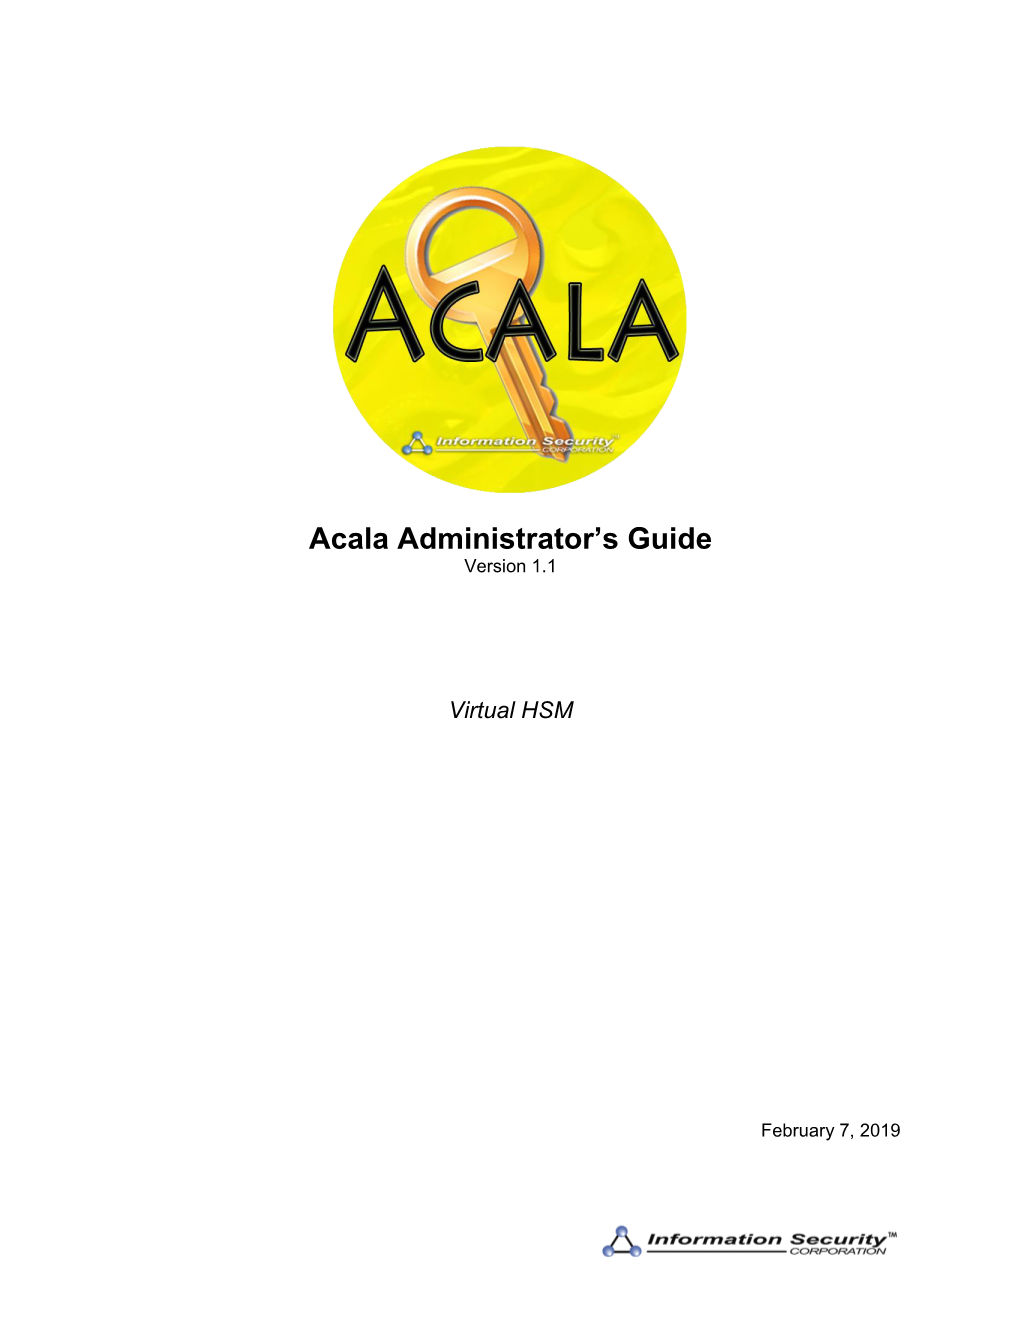 Acala Administrator's Guide